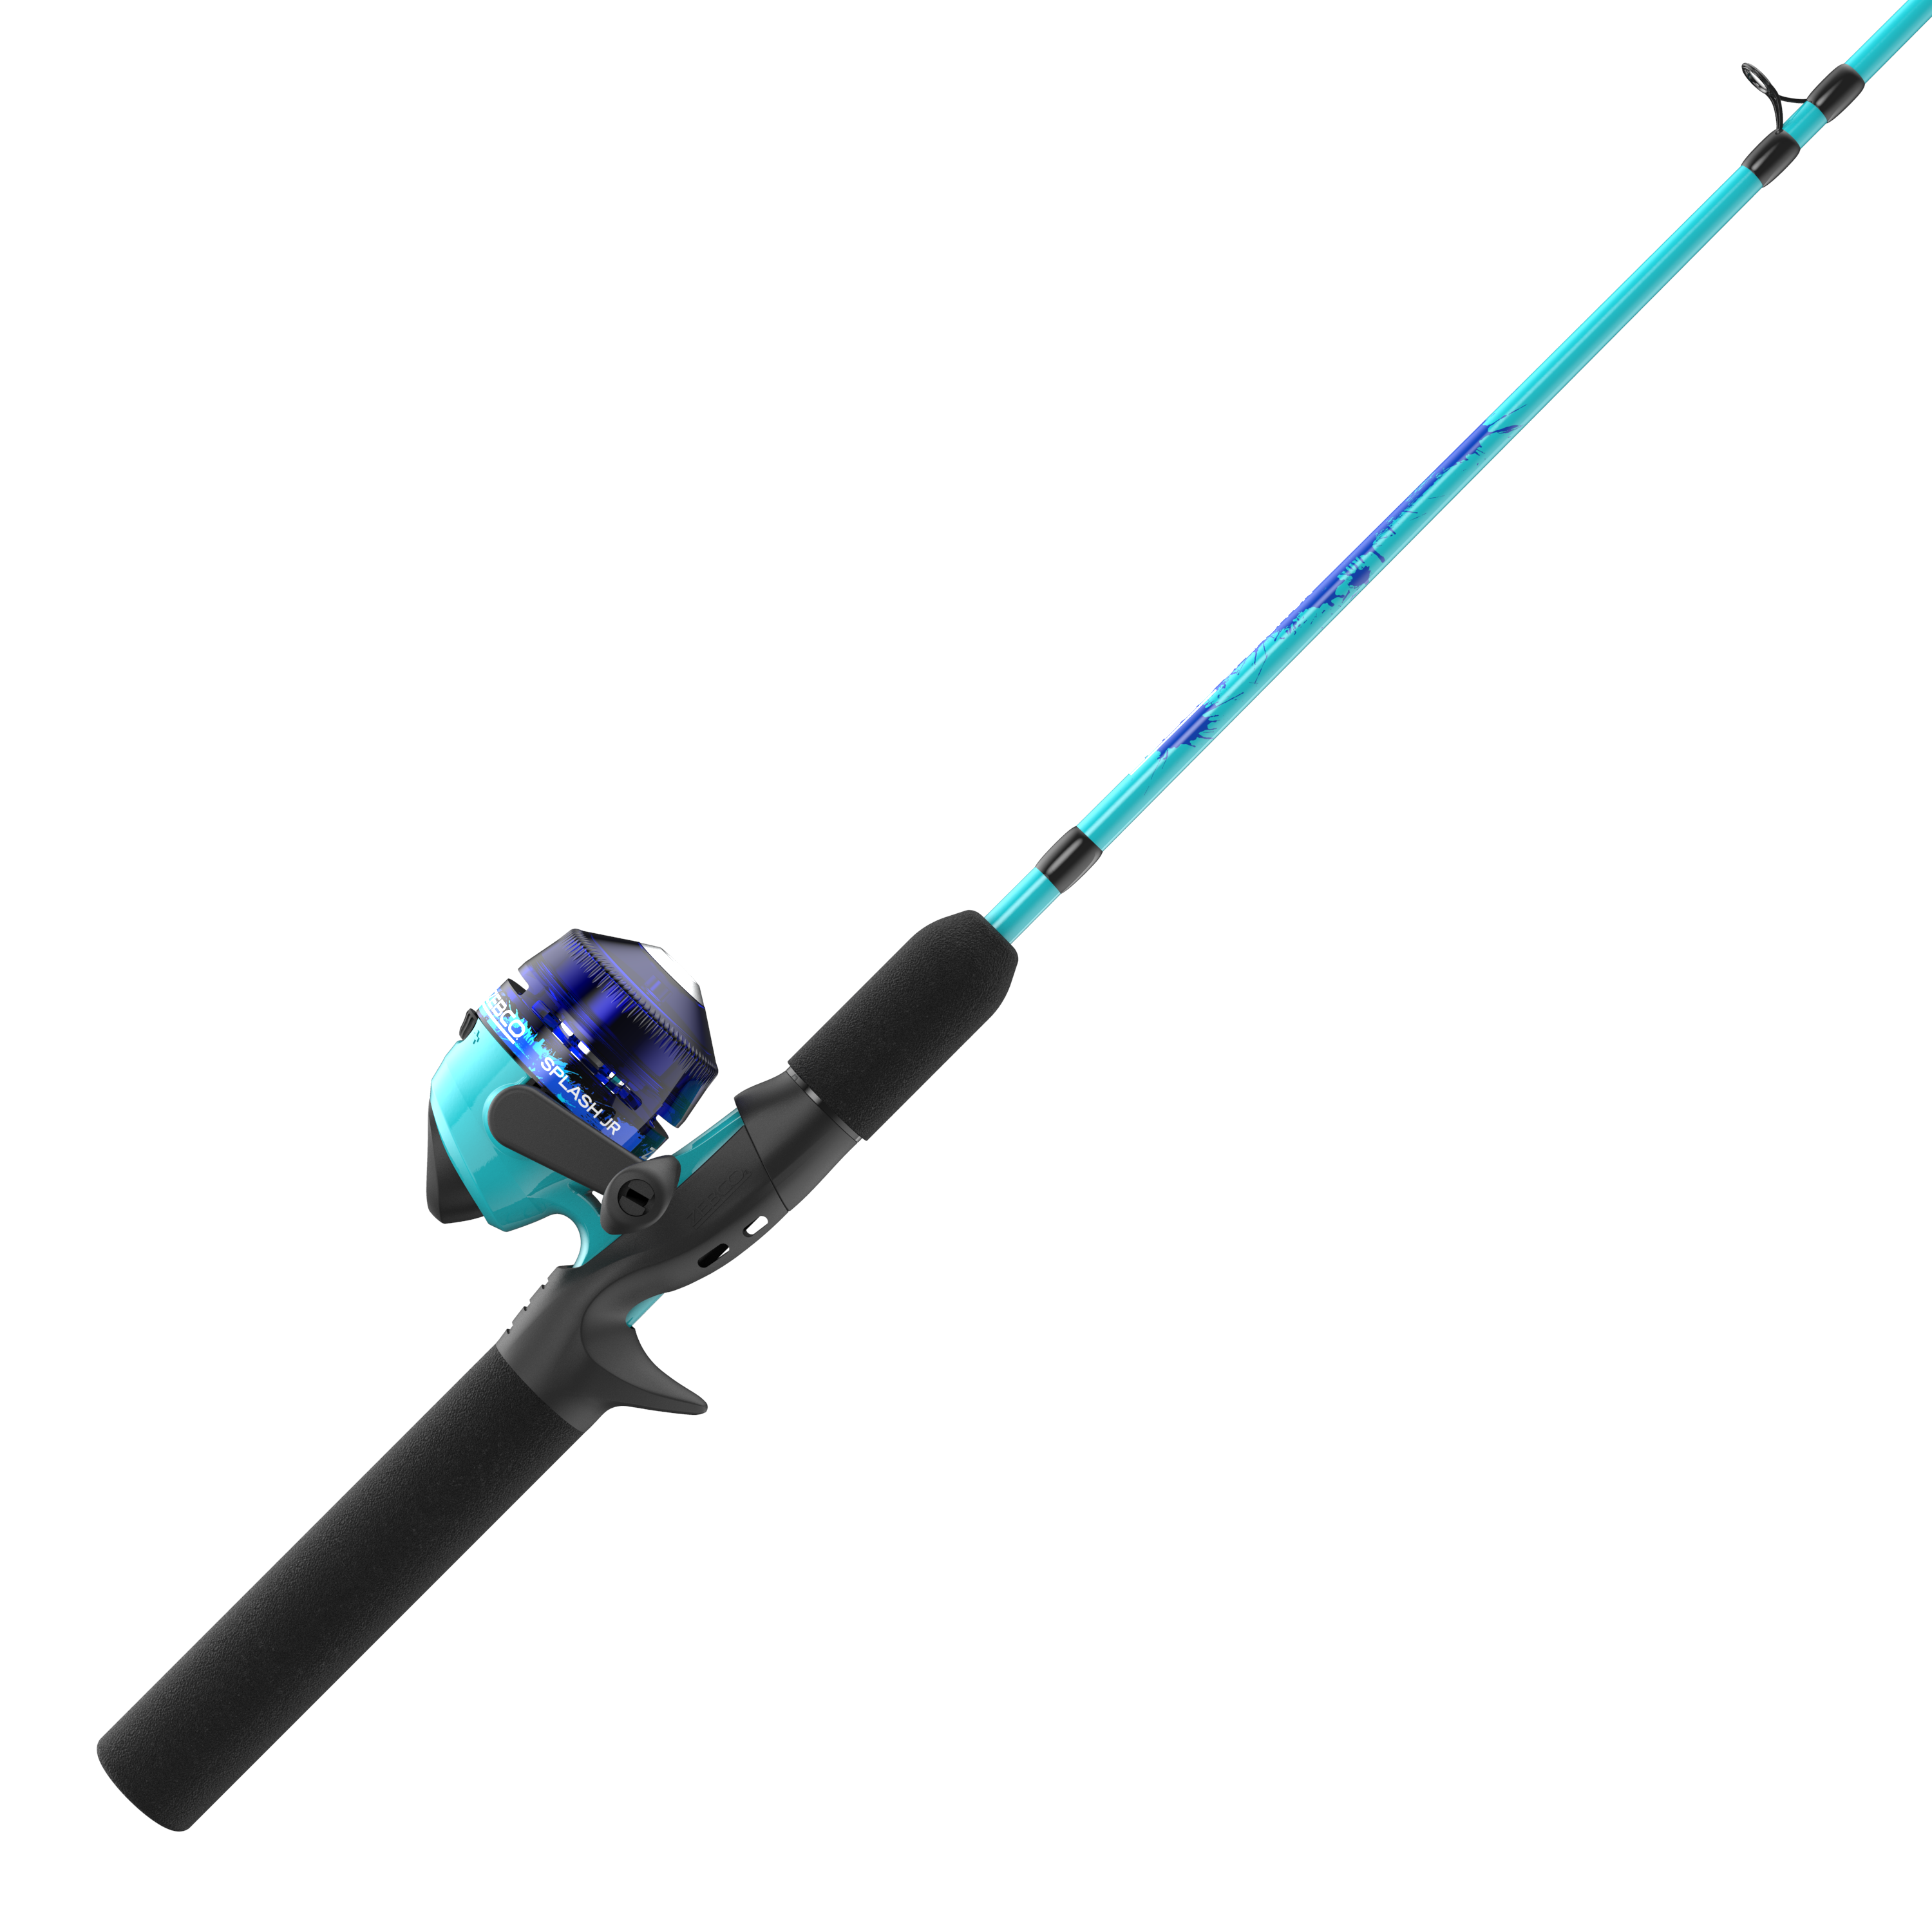 Fishing Poles for Kids, Childrens Fishing Rod Equipment Kit, Suitable for Youth  Boys Girls Aged 4-14, Children Beginner Fishing Gear Sets, Young Toddler  Little Pole Rods Starter Fish Kits, Child Boy Girl